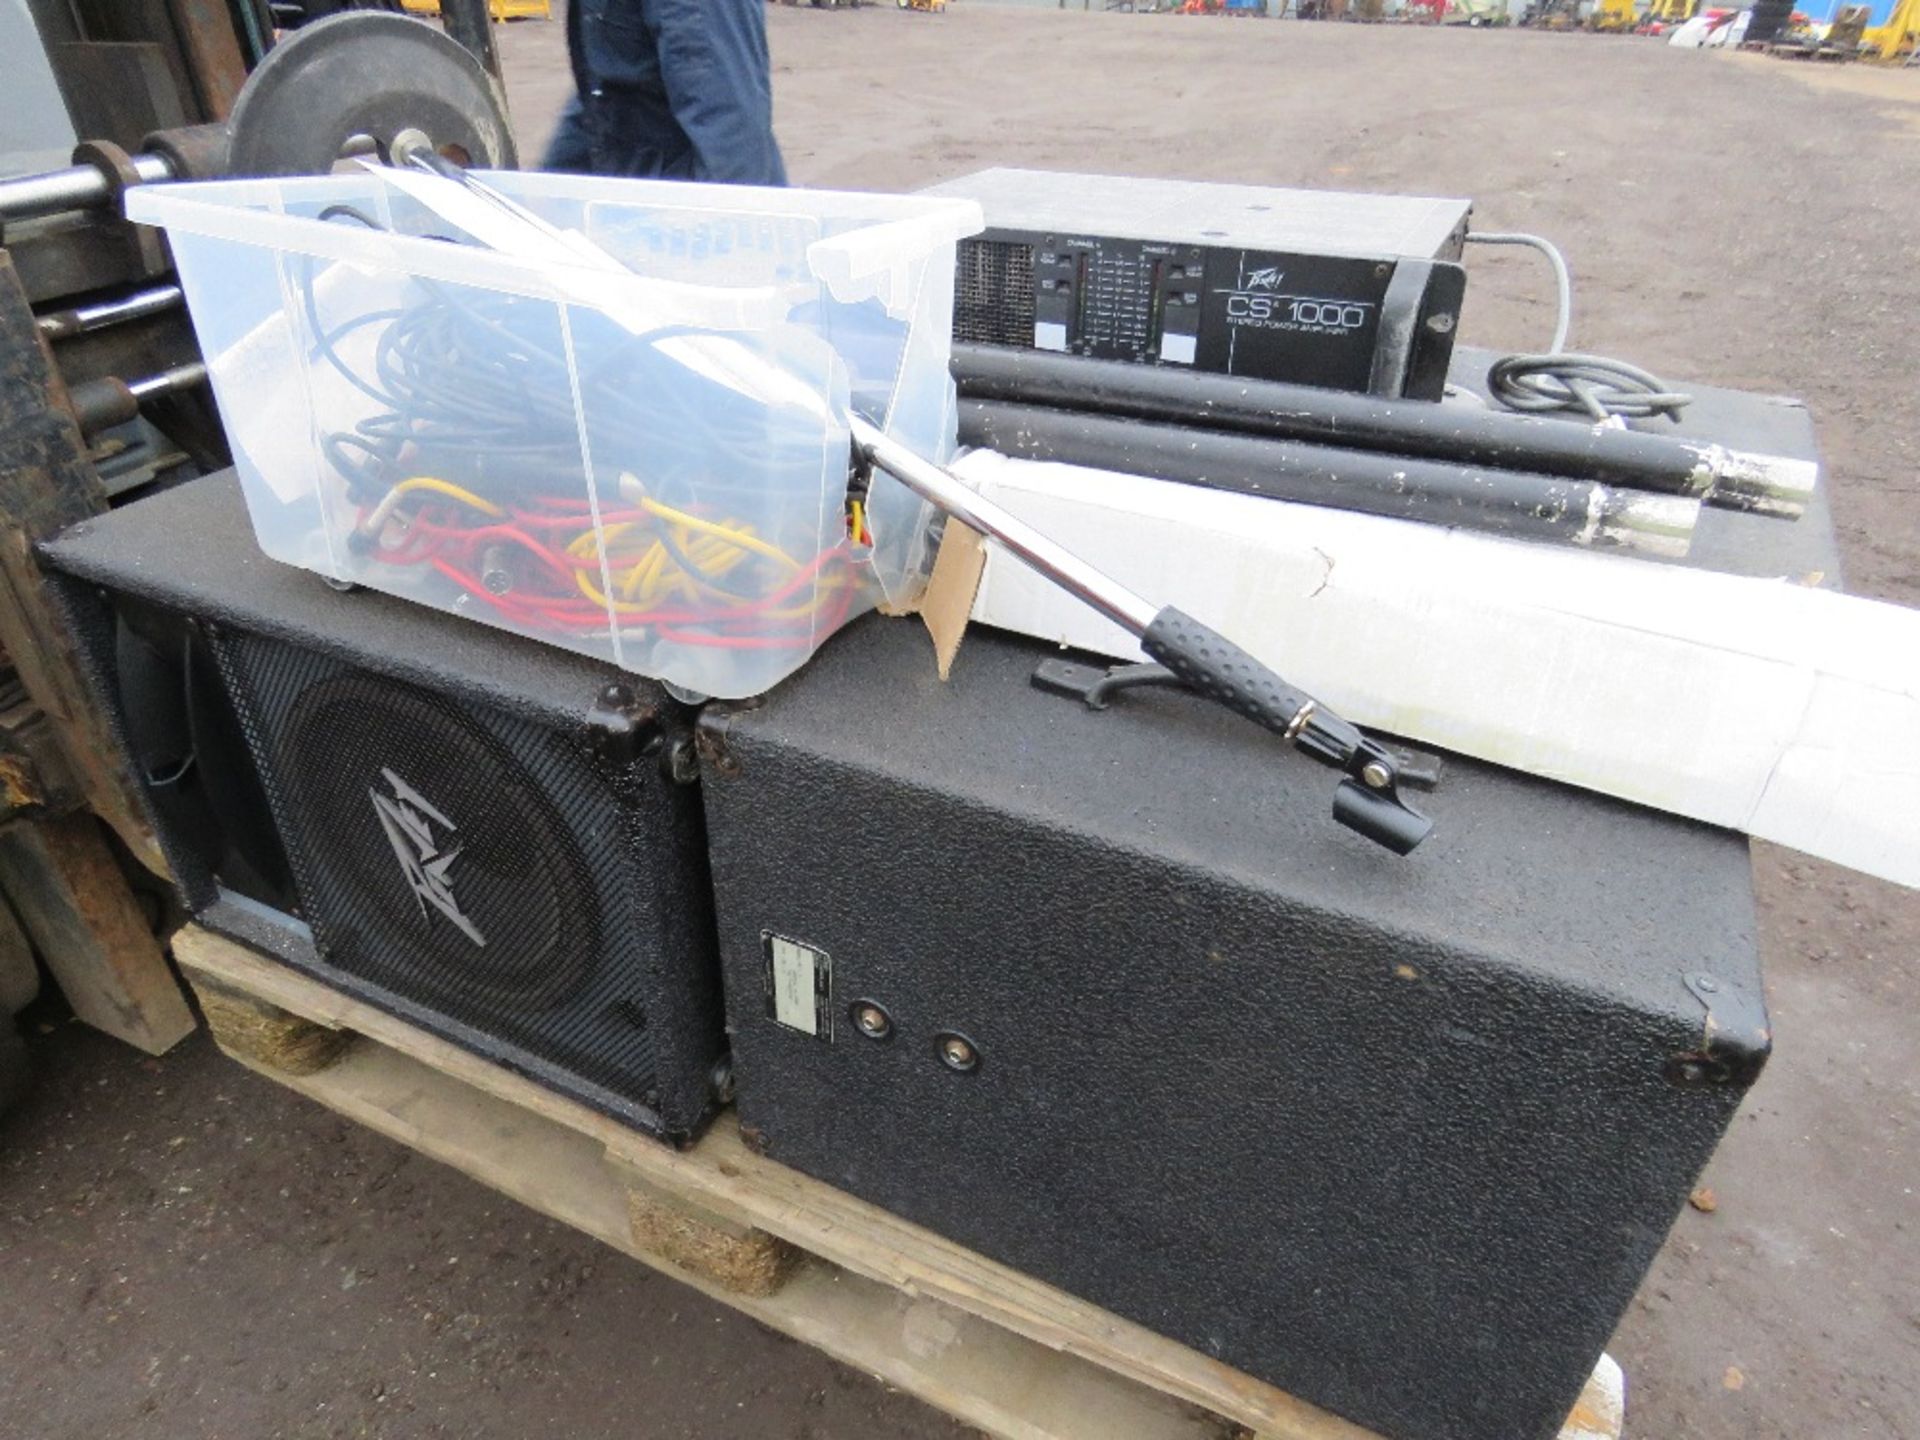 PUBLIC ADDRESS SYSTEM WITH 2 X MICROPHONES, CABLE, 4 X SPEAKERS AND A MIXER DECK.